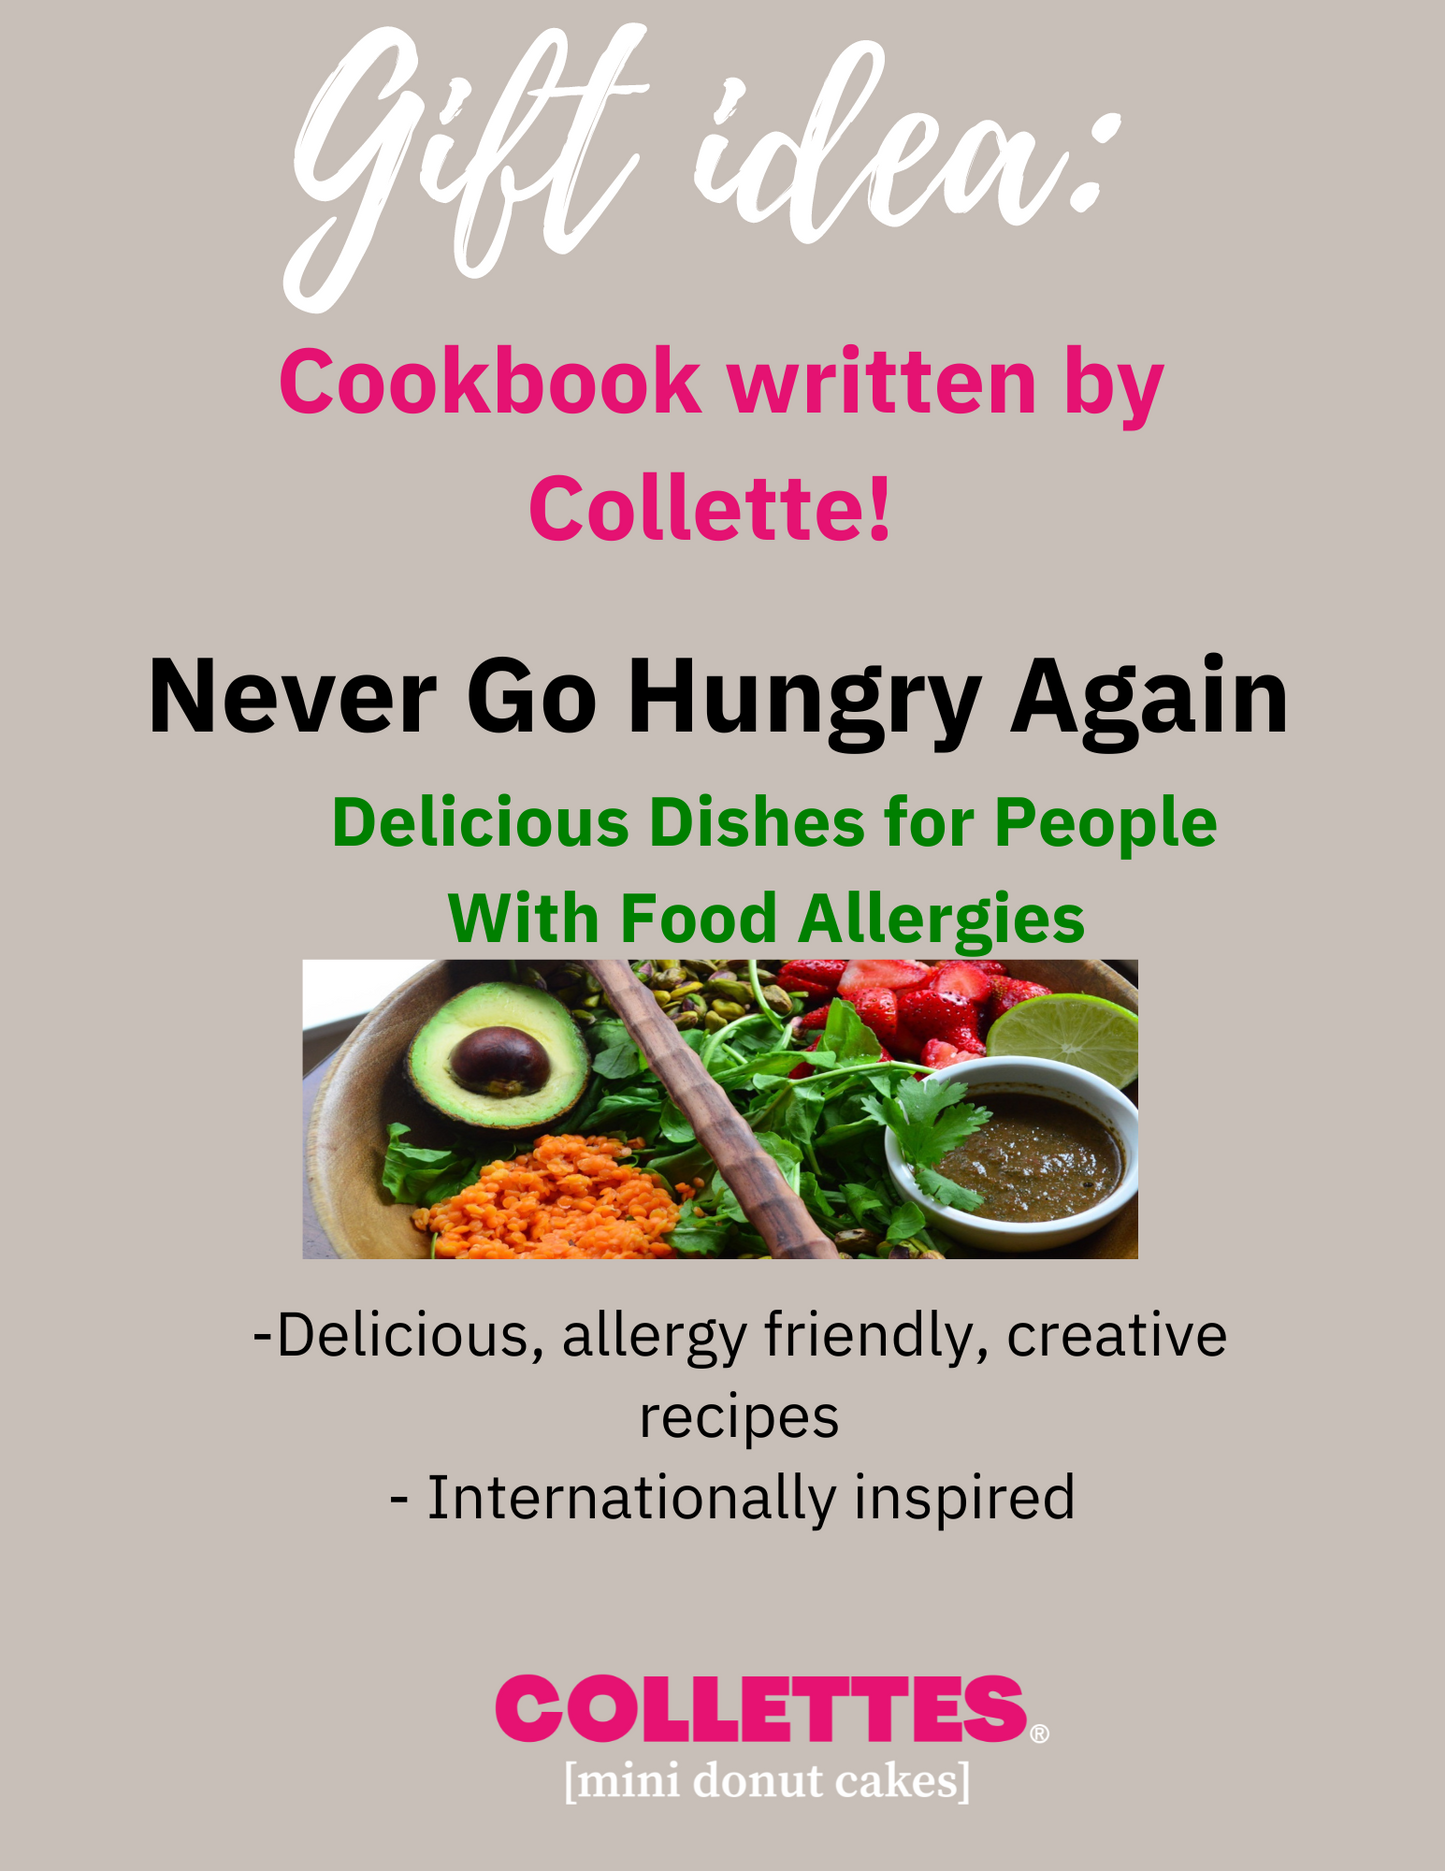 Cookbook Never Go Hungry Again written by Collette (order from B& N website link)